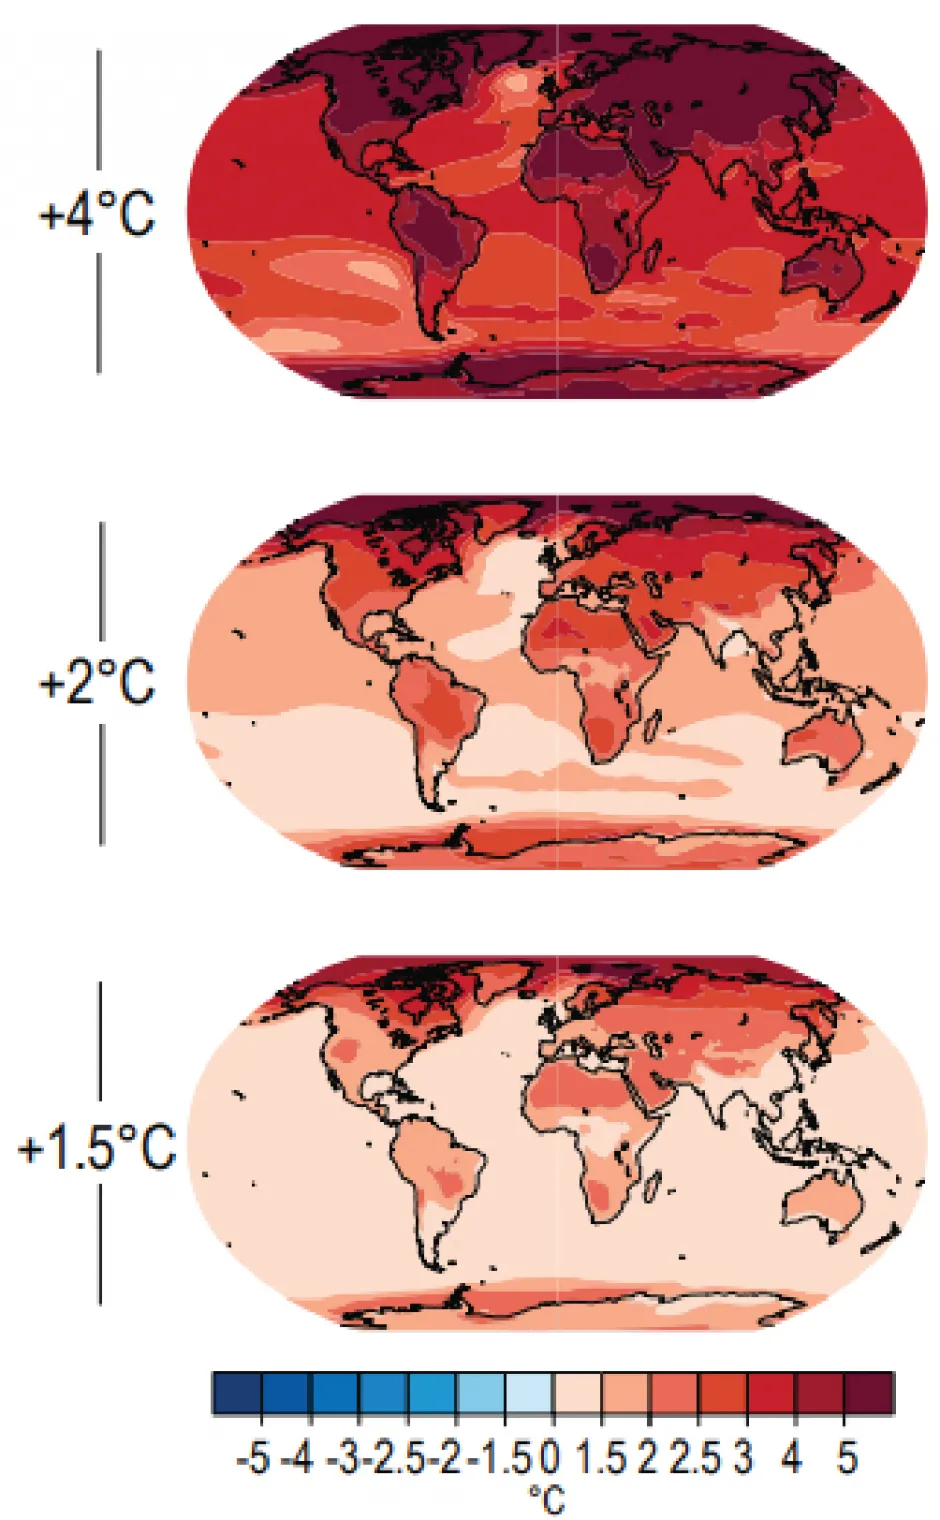 rojected Near Surface Temperature Change  Based on Warming Senarios10